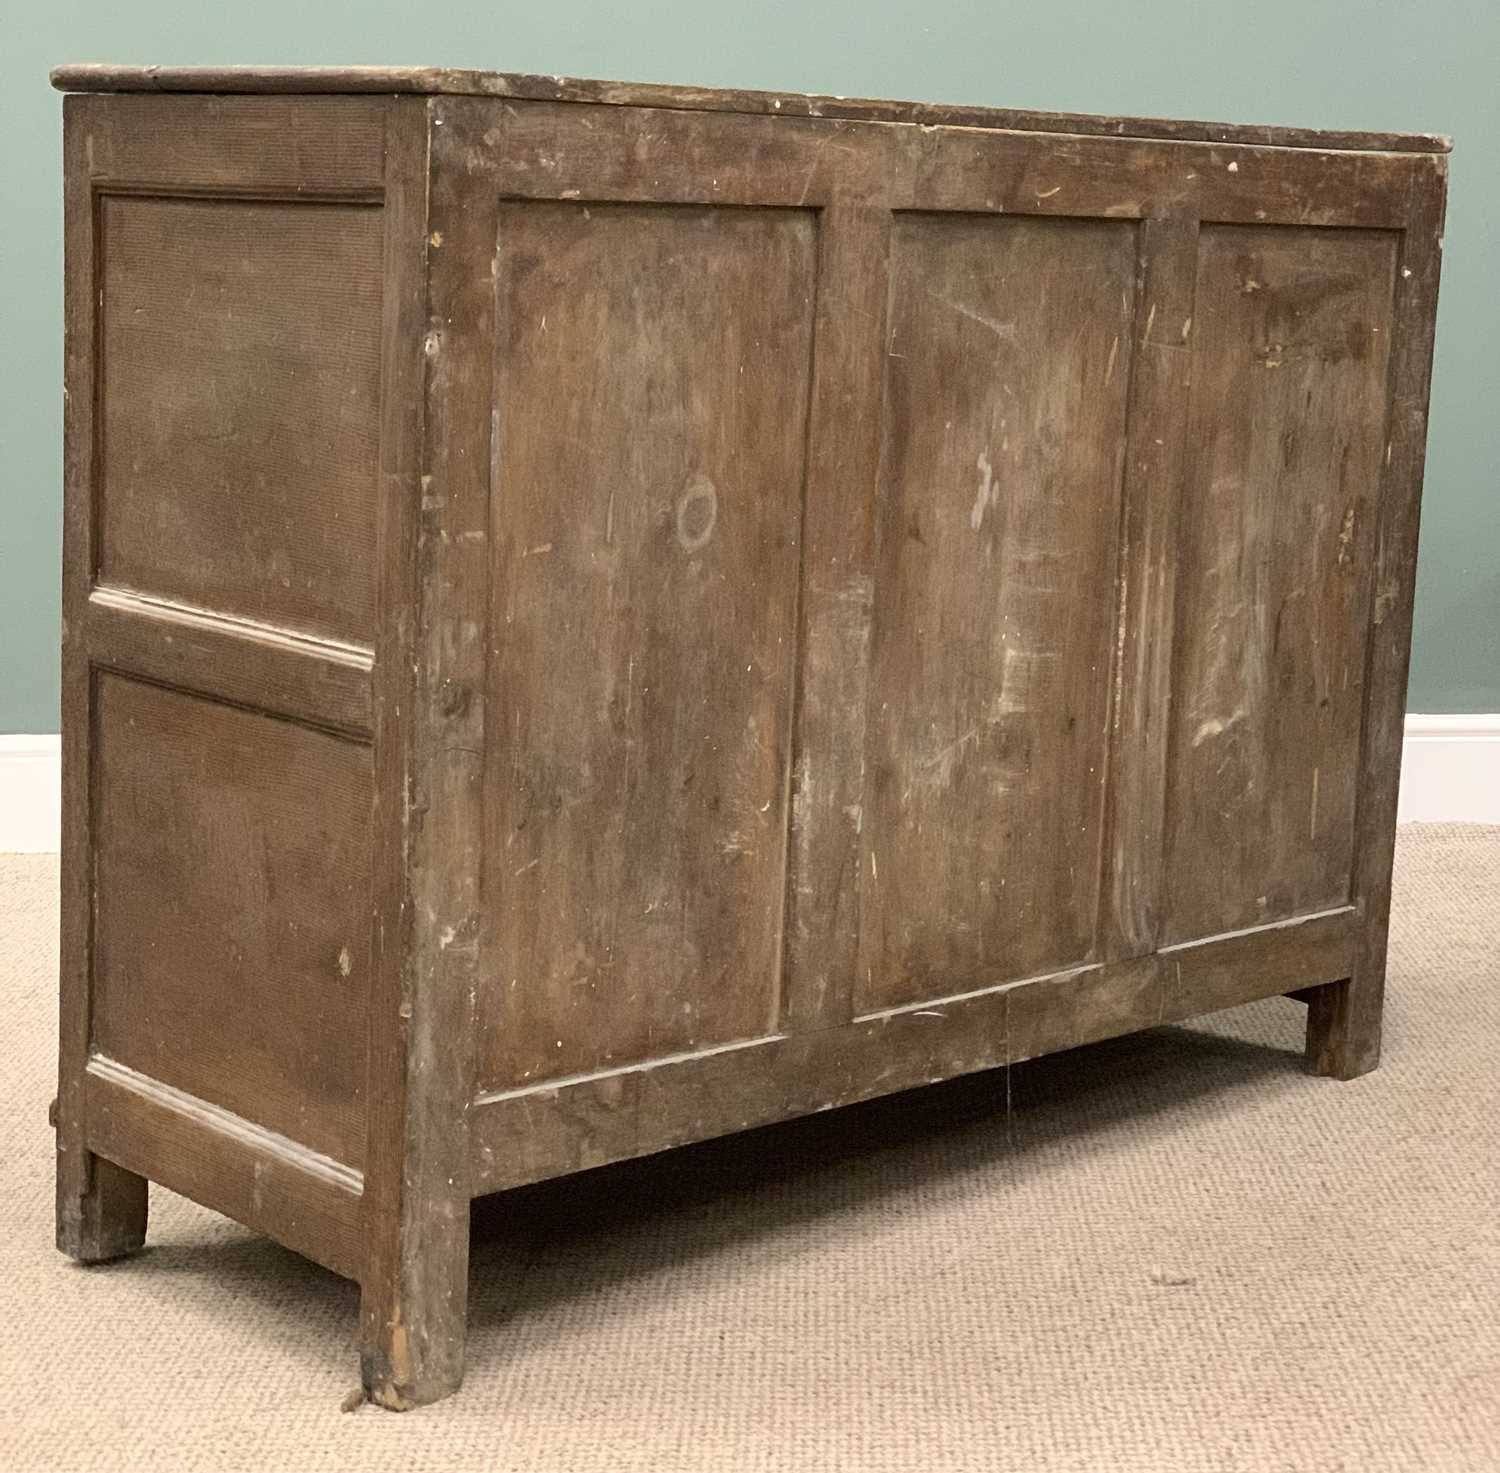 WELSH SCUMBLED PINE MULE CHEST. 19th Century, three recess panels above base drawer, 100 (h) x - Image 5 of 5